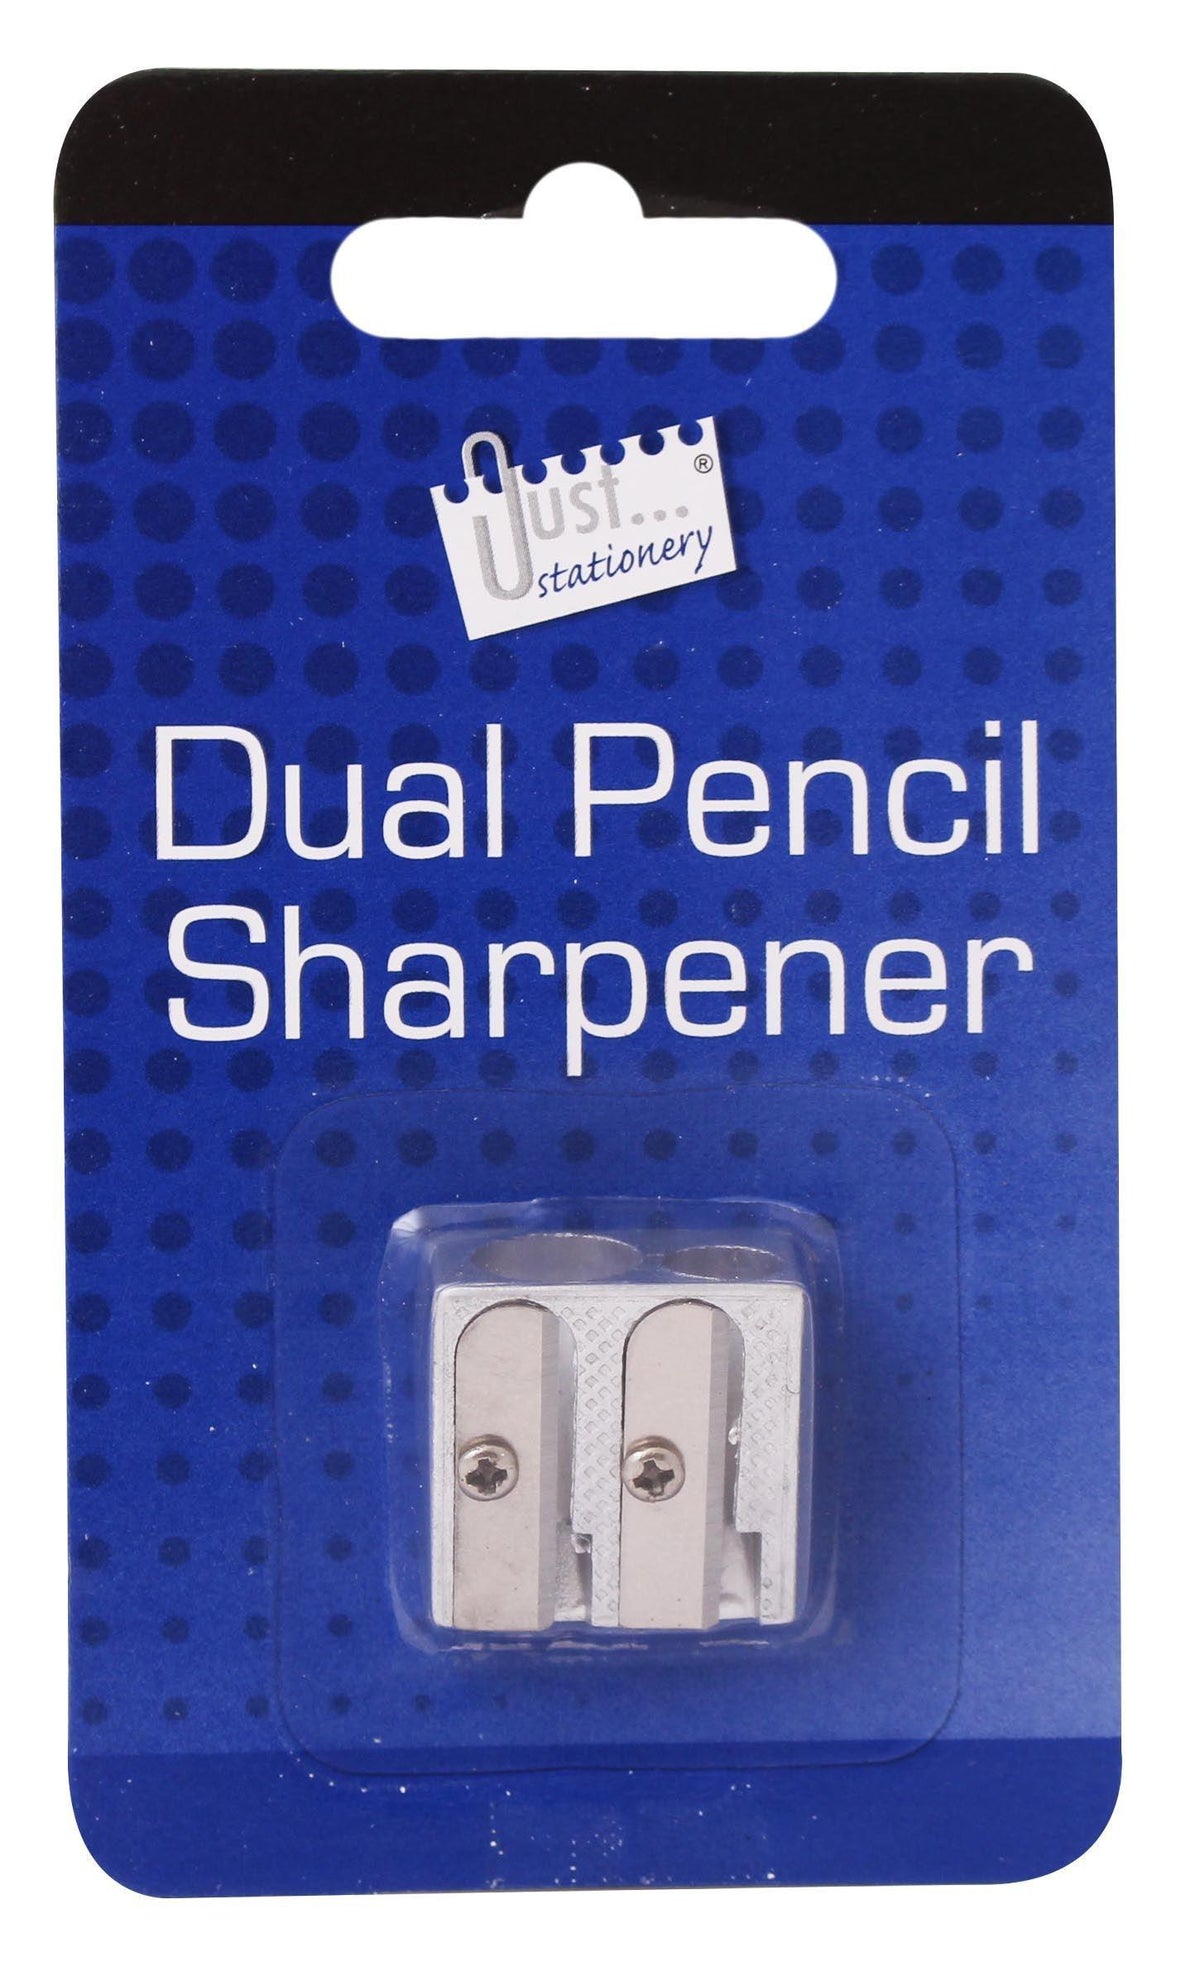 Just stationery Dual Metal Pencil Sharpener - Choice Stores